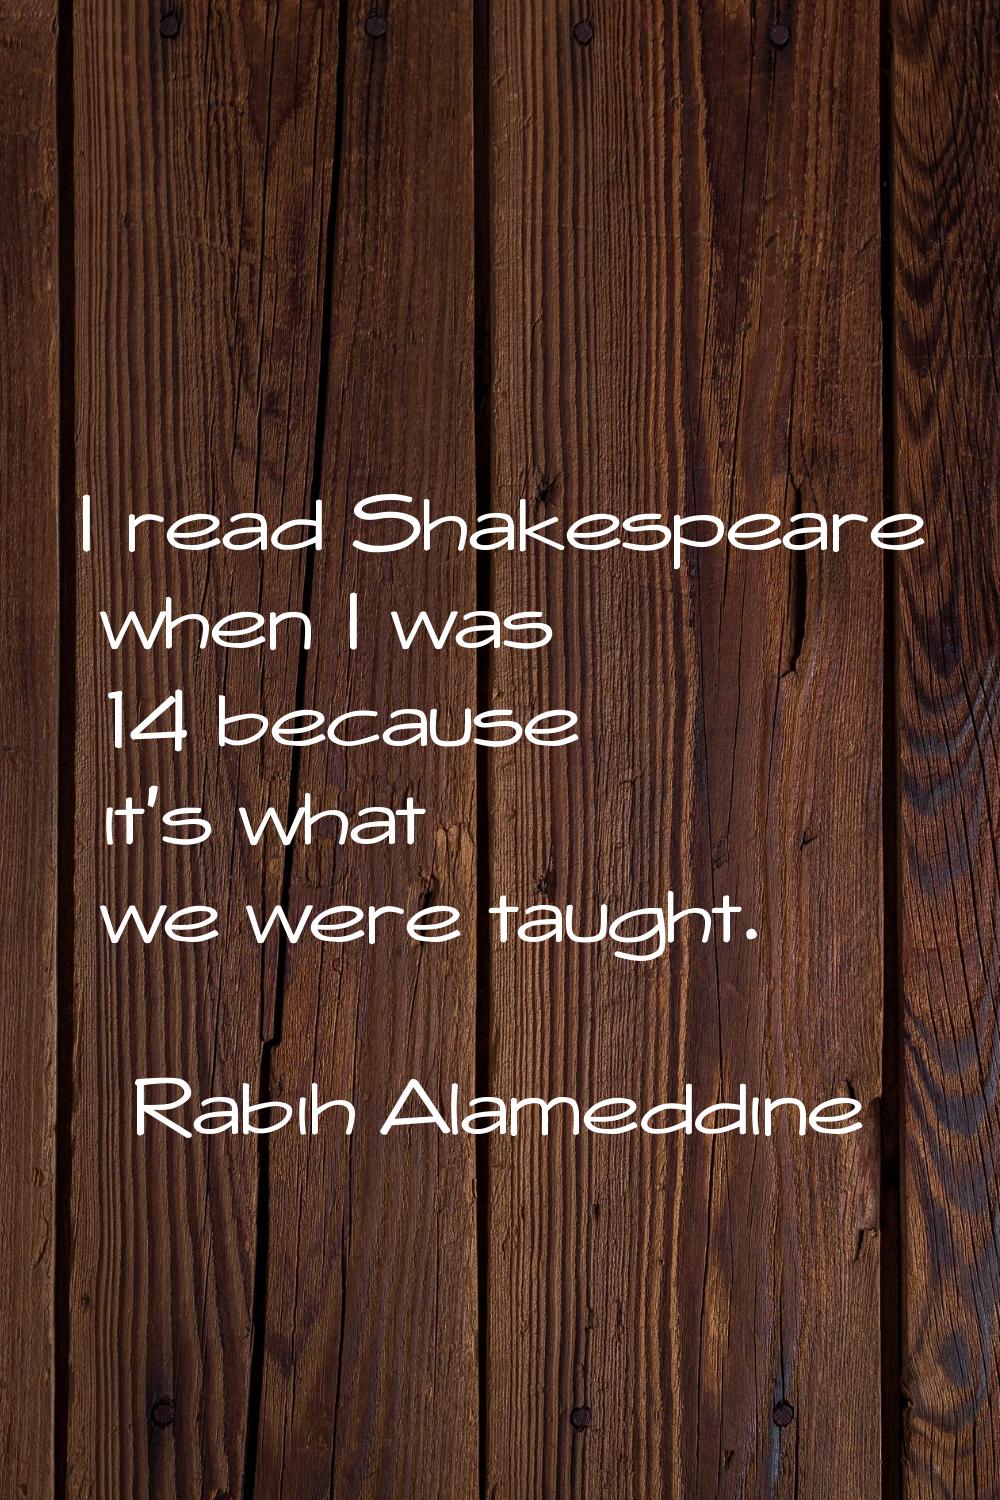 I read Shakespeare when I was 14 because it's what we were taught.